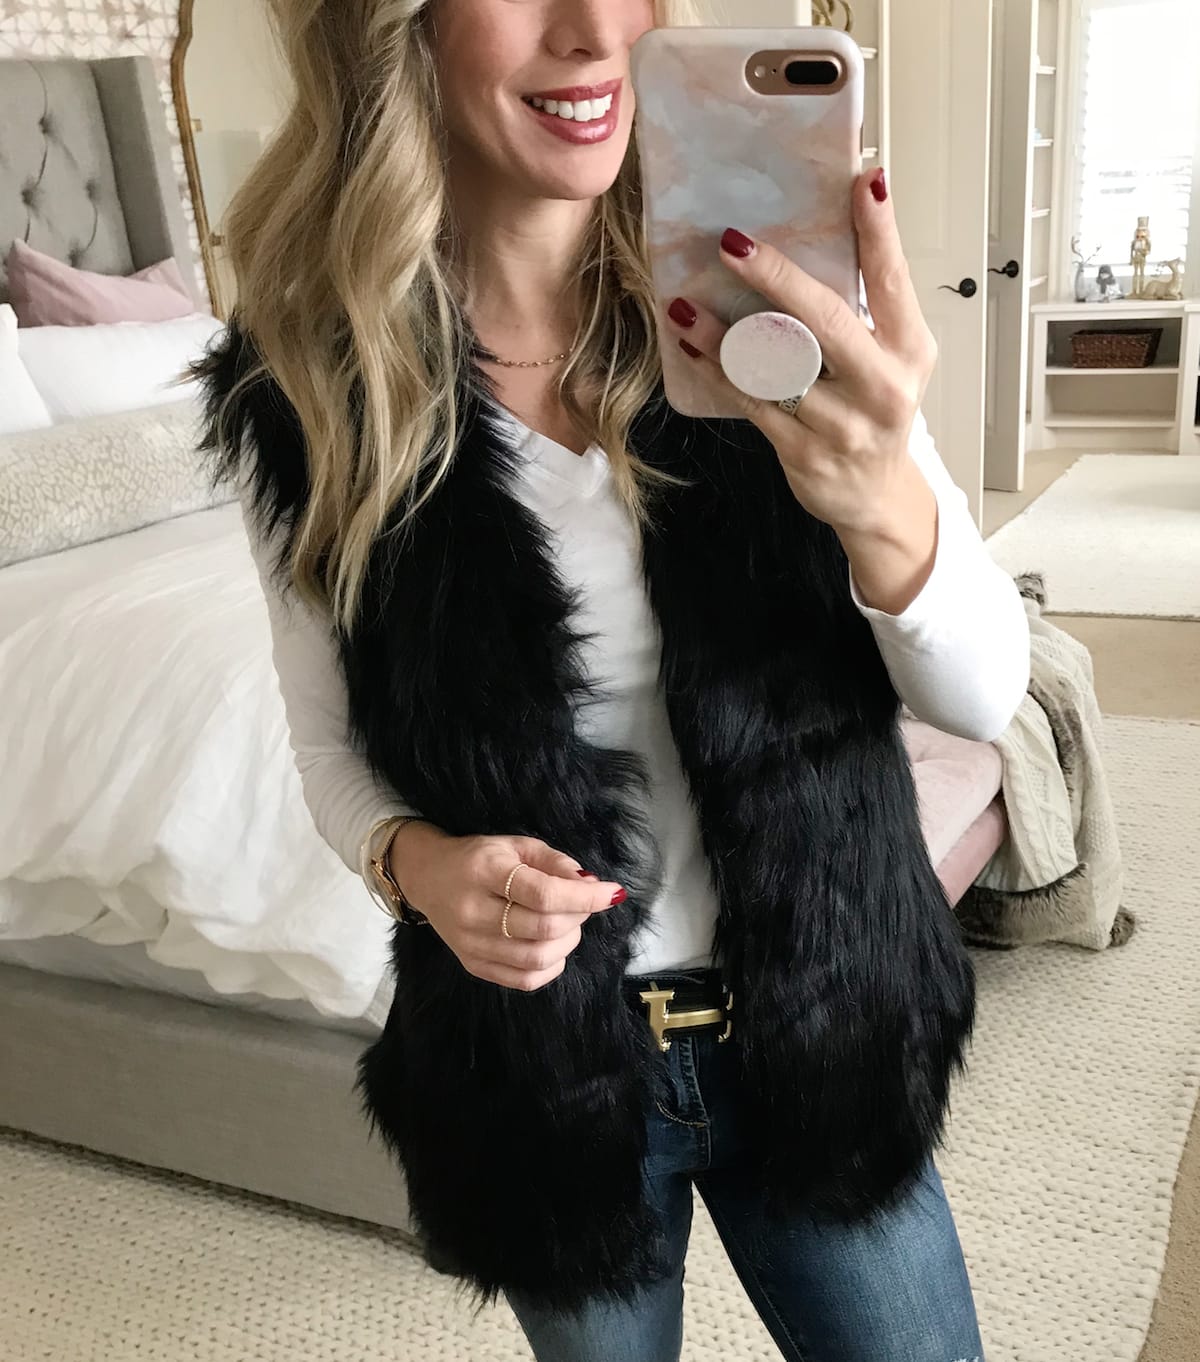 Amazon Fashion Haul - jeans and faux fur vest with v neck tee shirt (1)